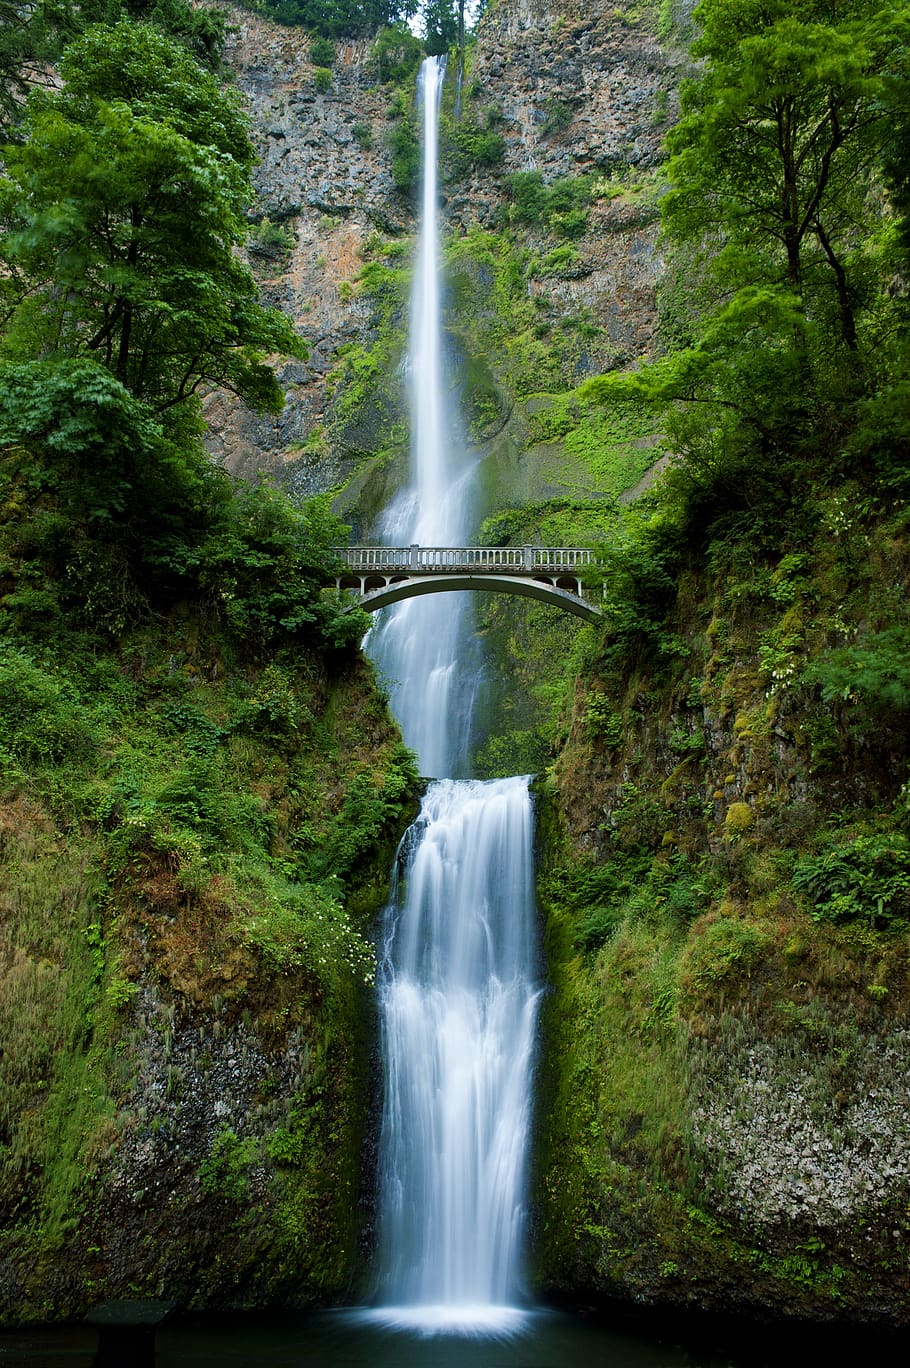 waterfall, oregon, nature, landscape, water, scenic, outdoors, forest, woods, trees